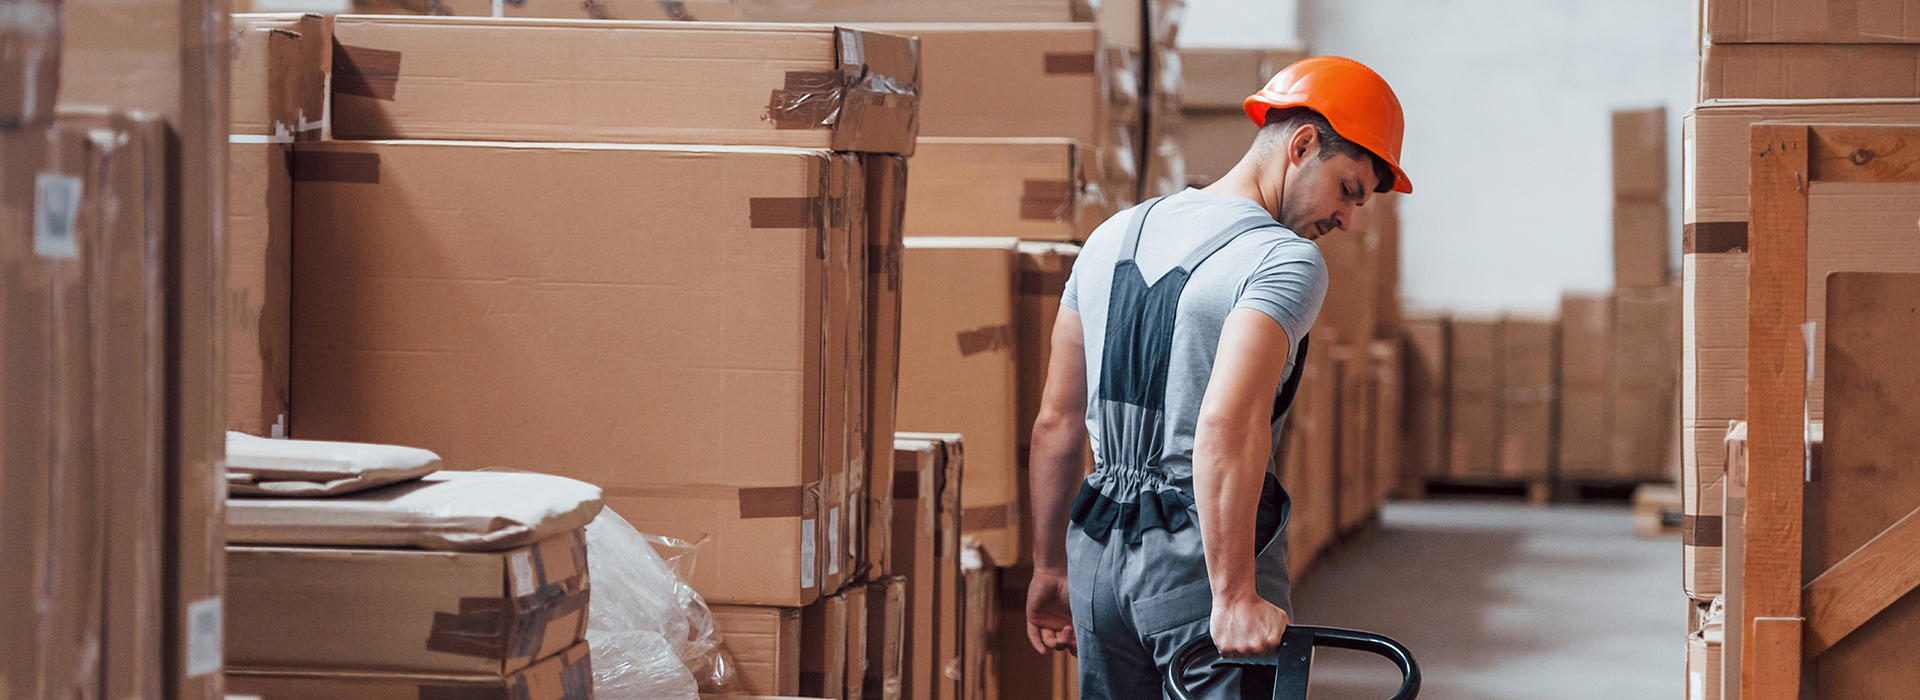 The Challenges Of Keeping Warehouse Visitors Safe